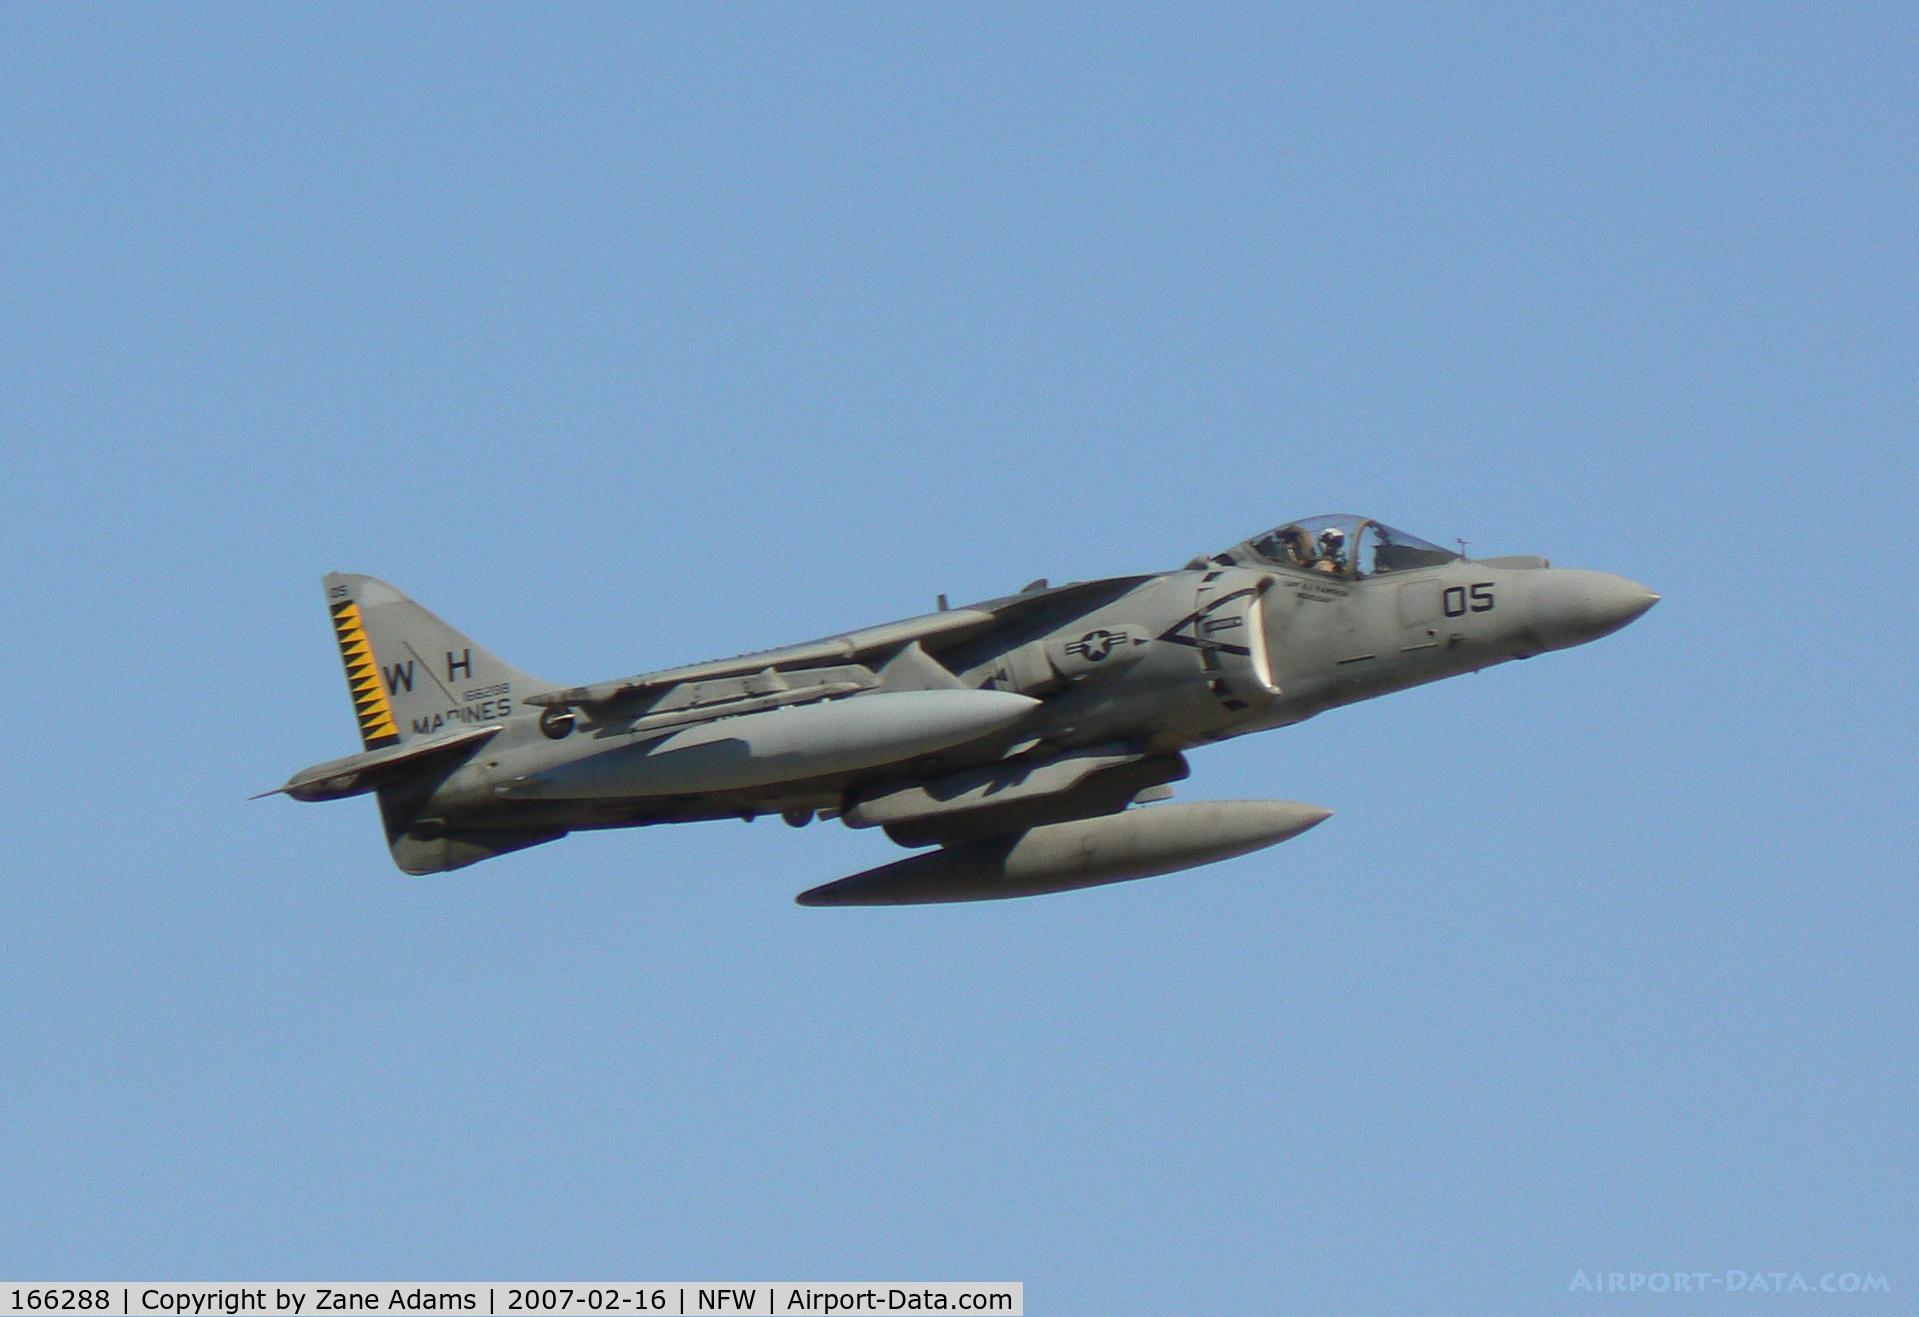 166288, Boeing AV-8B+(R)-25-MC C/N 336, Formely BuNo. 163678 last of the AV-8B Oscar Program remanufacture of Harriers from day strike aircraft to night attack RADAR aircraft.